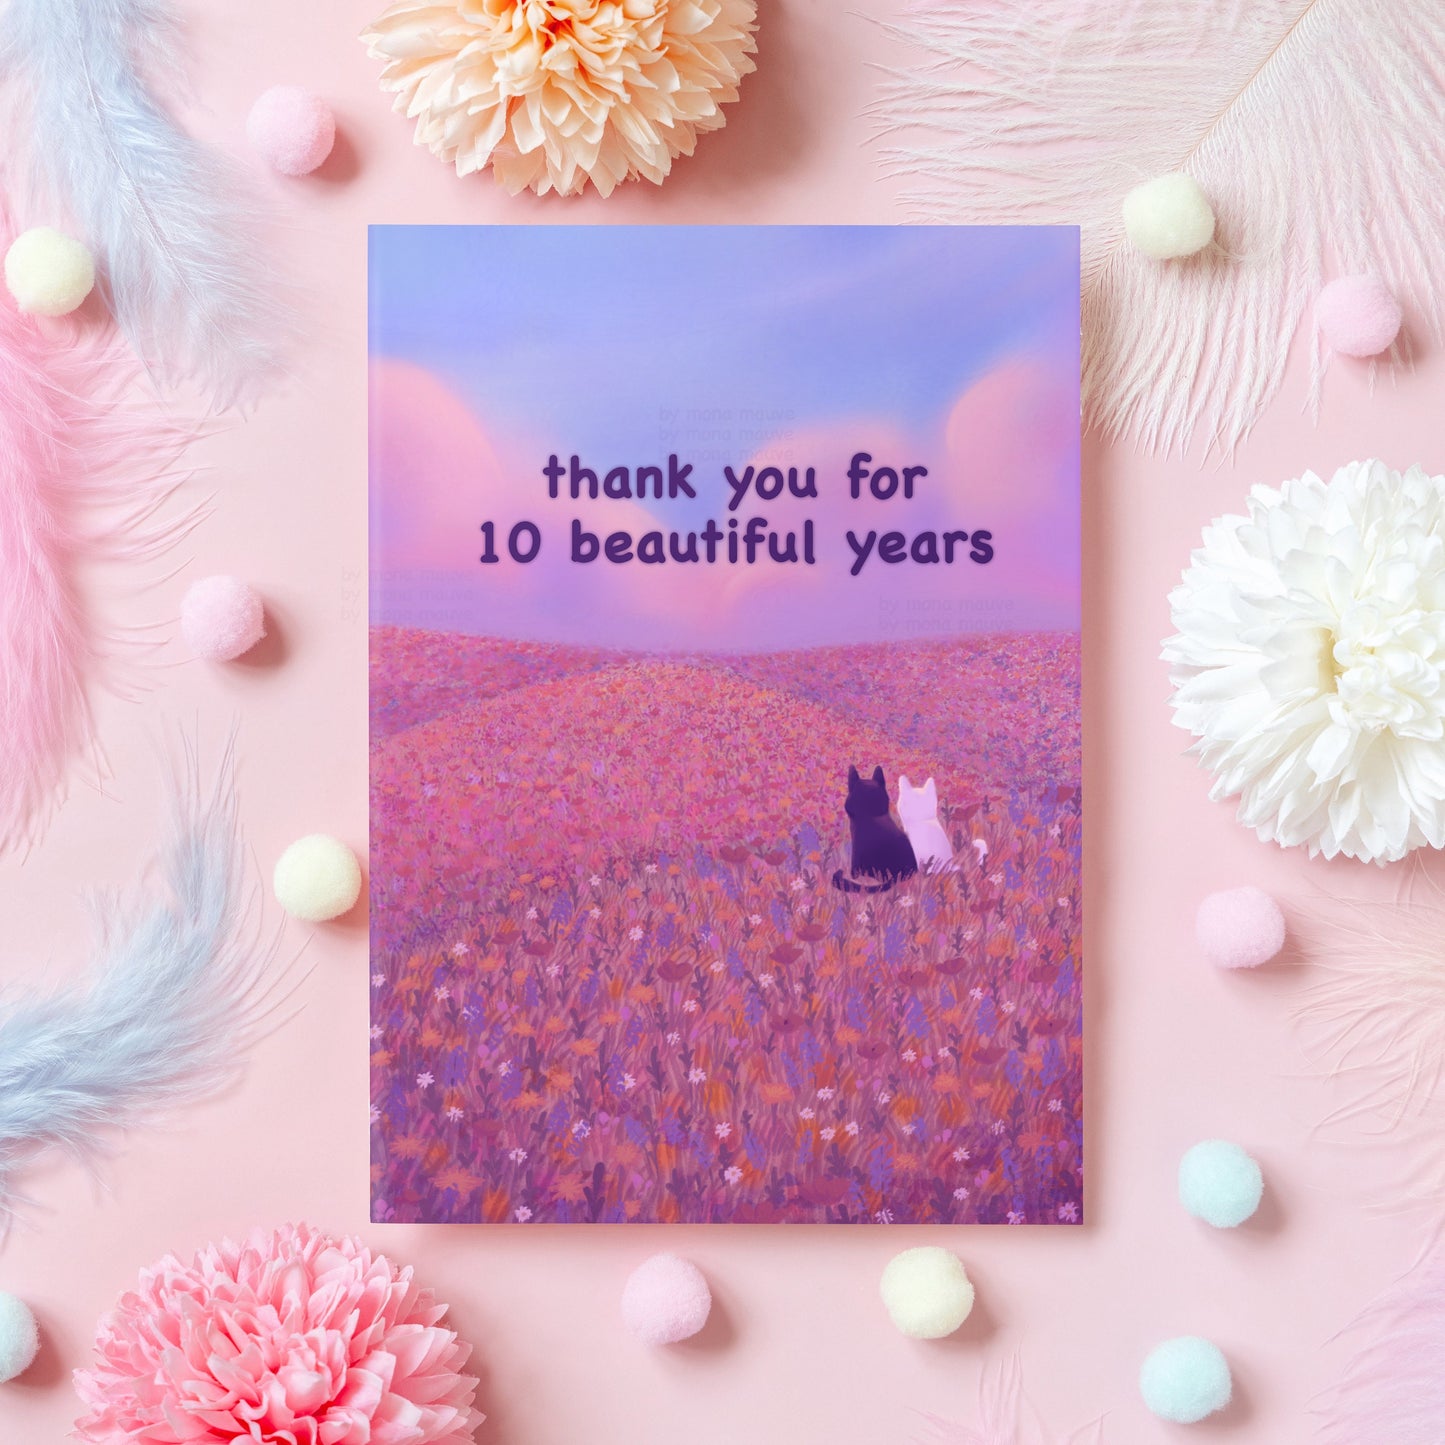 Cute 10th Anniversary Card | Thank You for 10 Beautiful Years | Heartfelt Gift for Husband, Wife, Boyfriend, Girlfriend - Her or Him